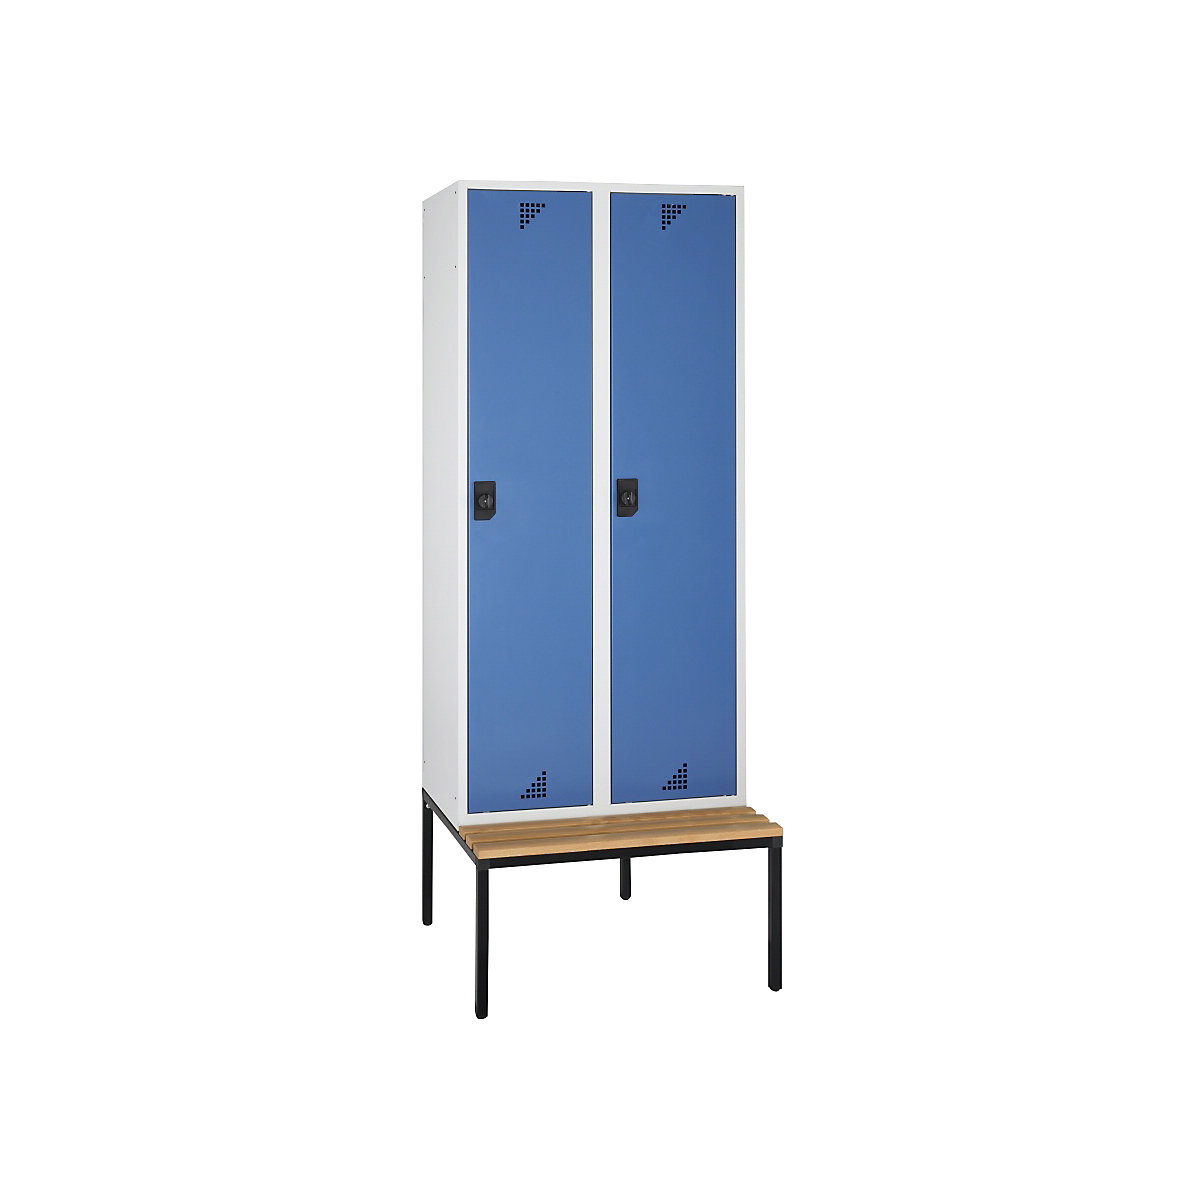 Multi-purpose cupboard and cloakroom locker – eurokraft pro, with seat bench, 2 compartments, width 800 mm, brilliant blue doors-5